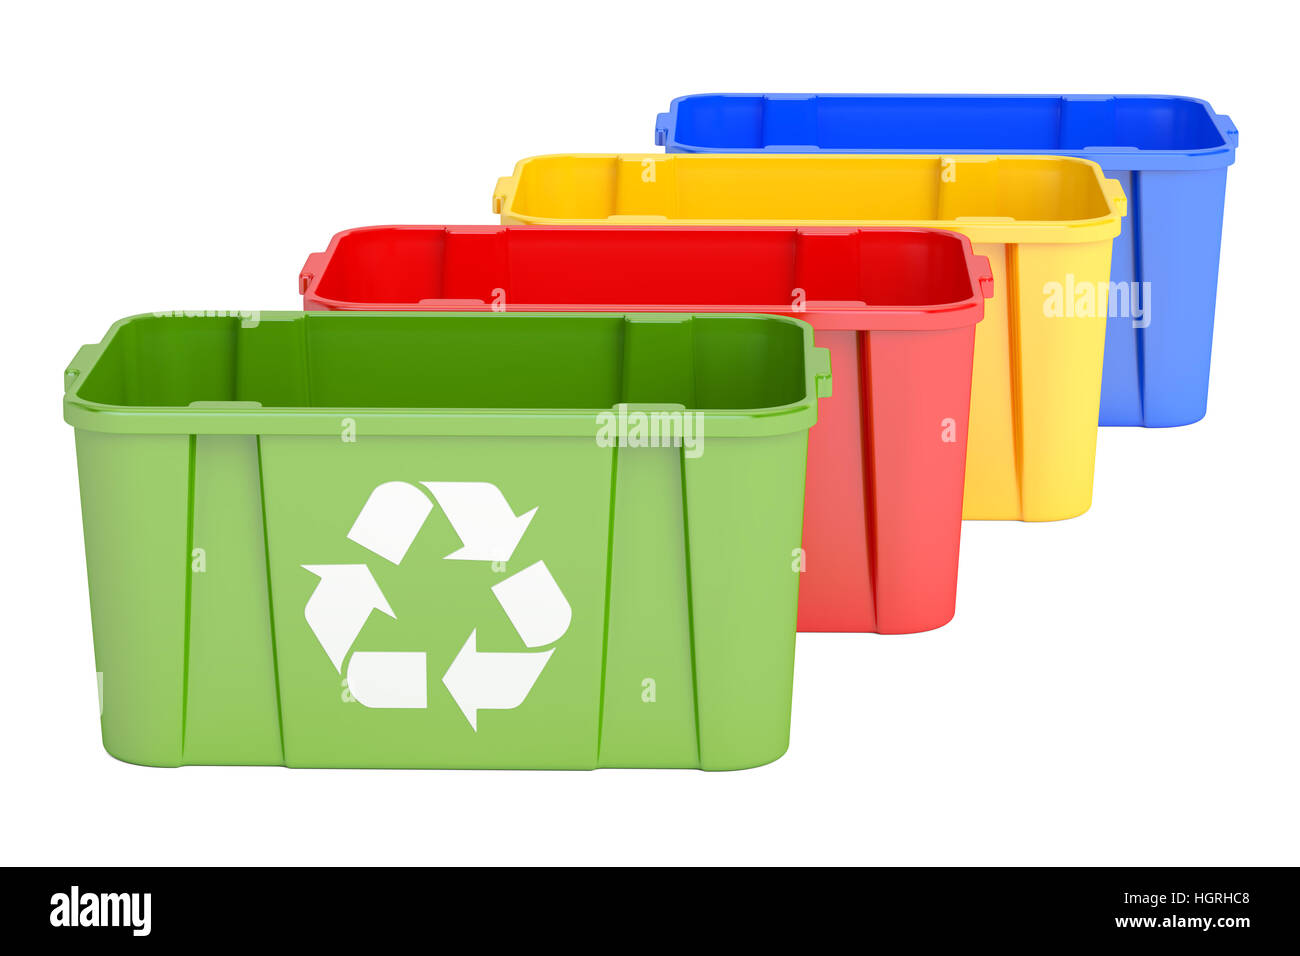 Colored recycling bins, 3D rendering isolated on white background Stock Photo